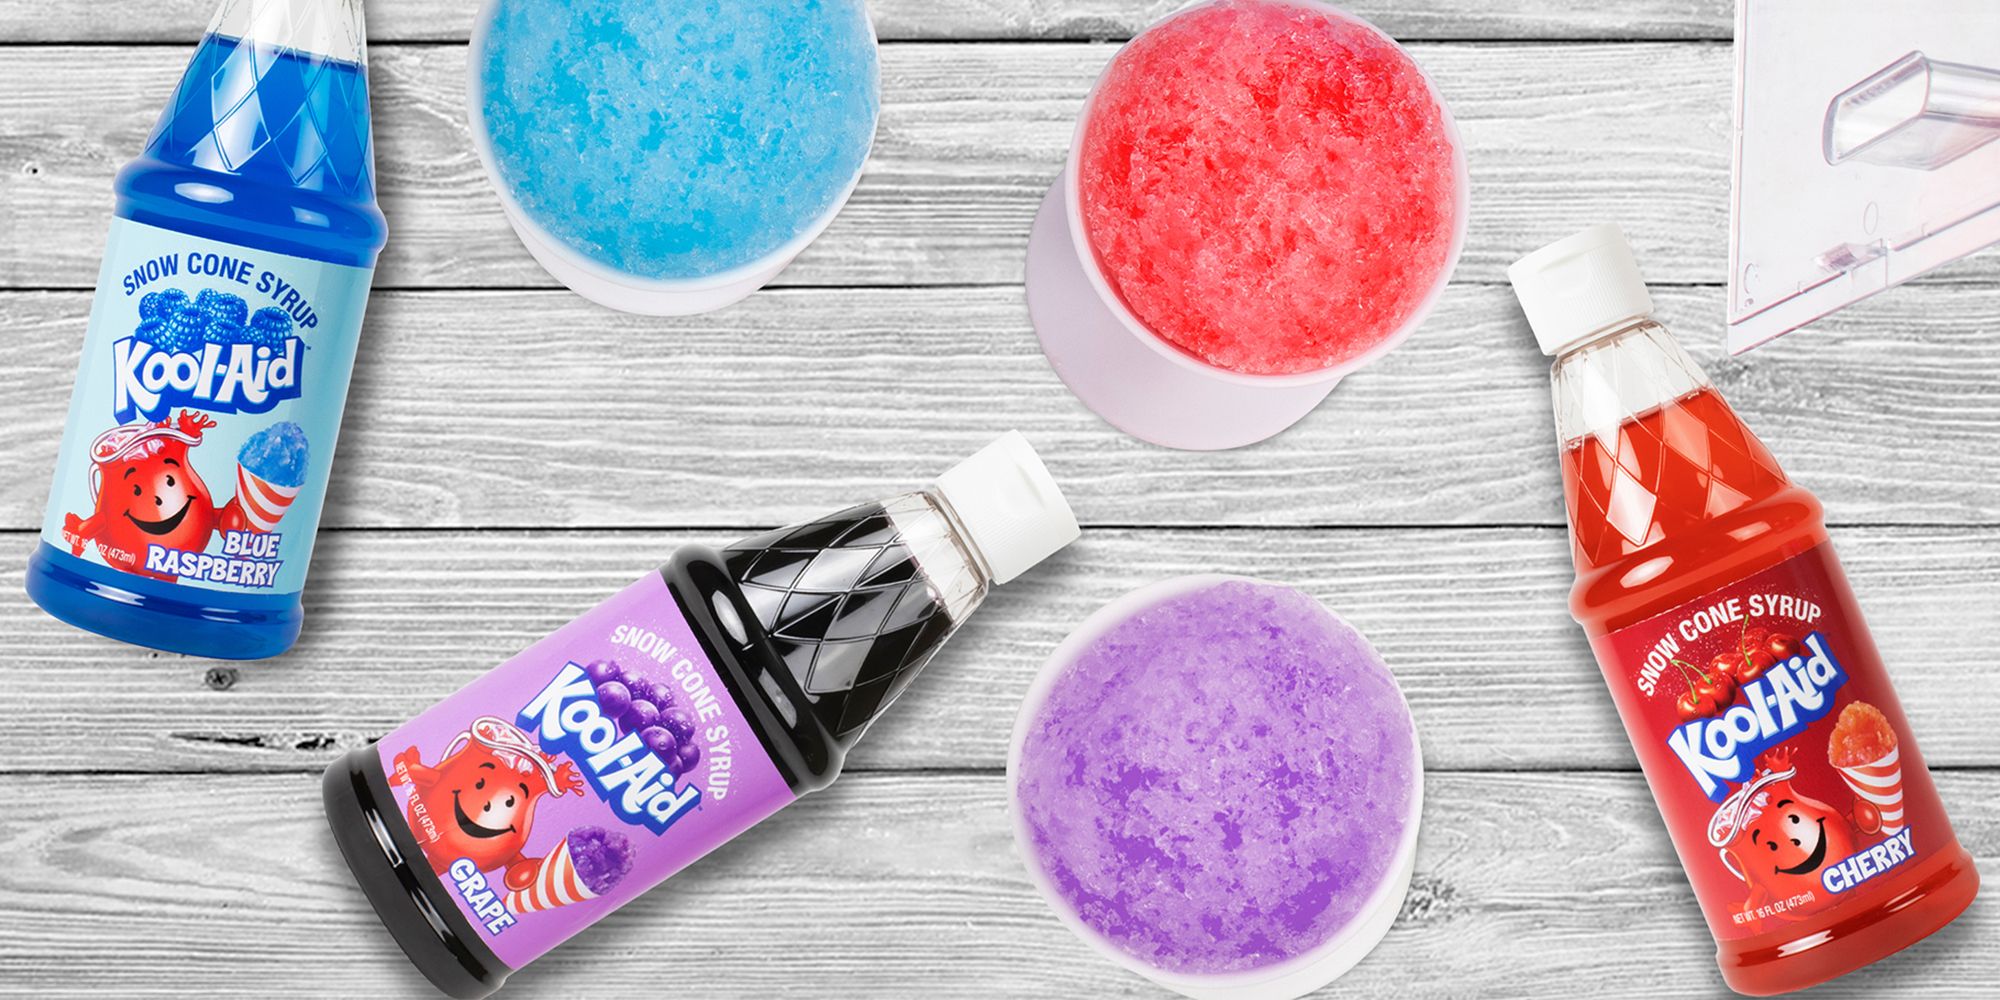 These New Kool-Aid Syrups Will Give You the Tastiest Snow Cones You Can Make